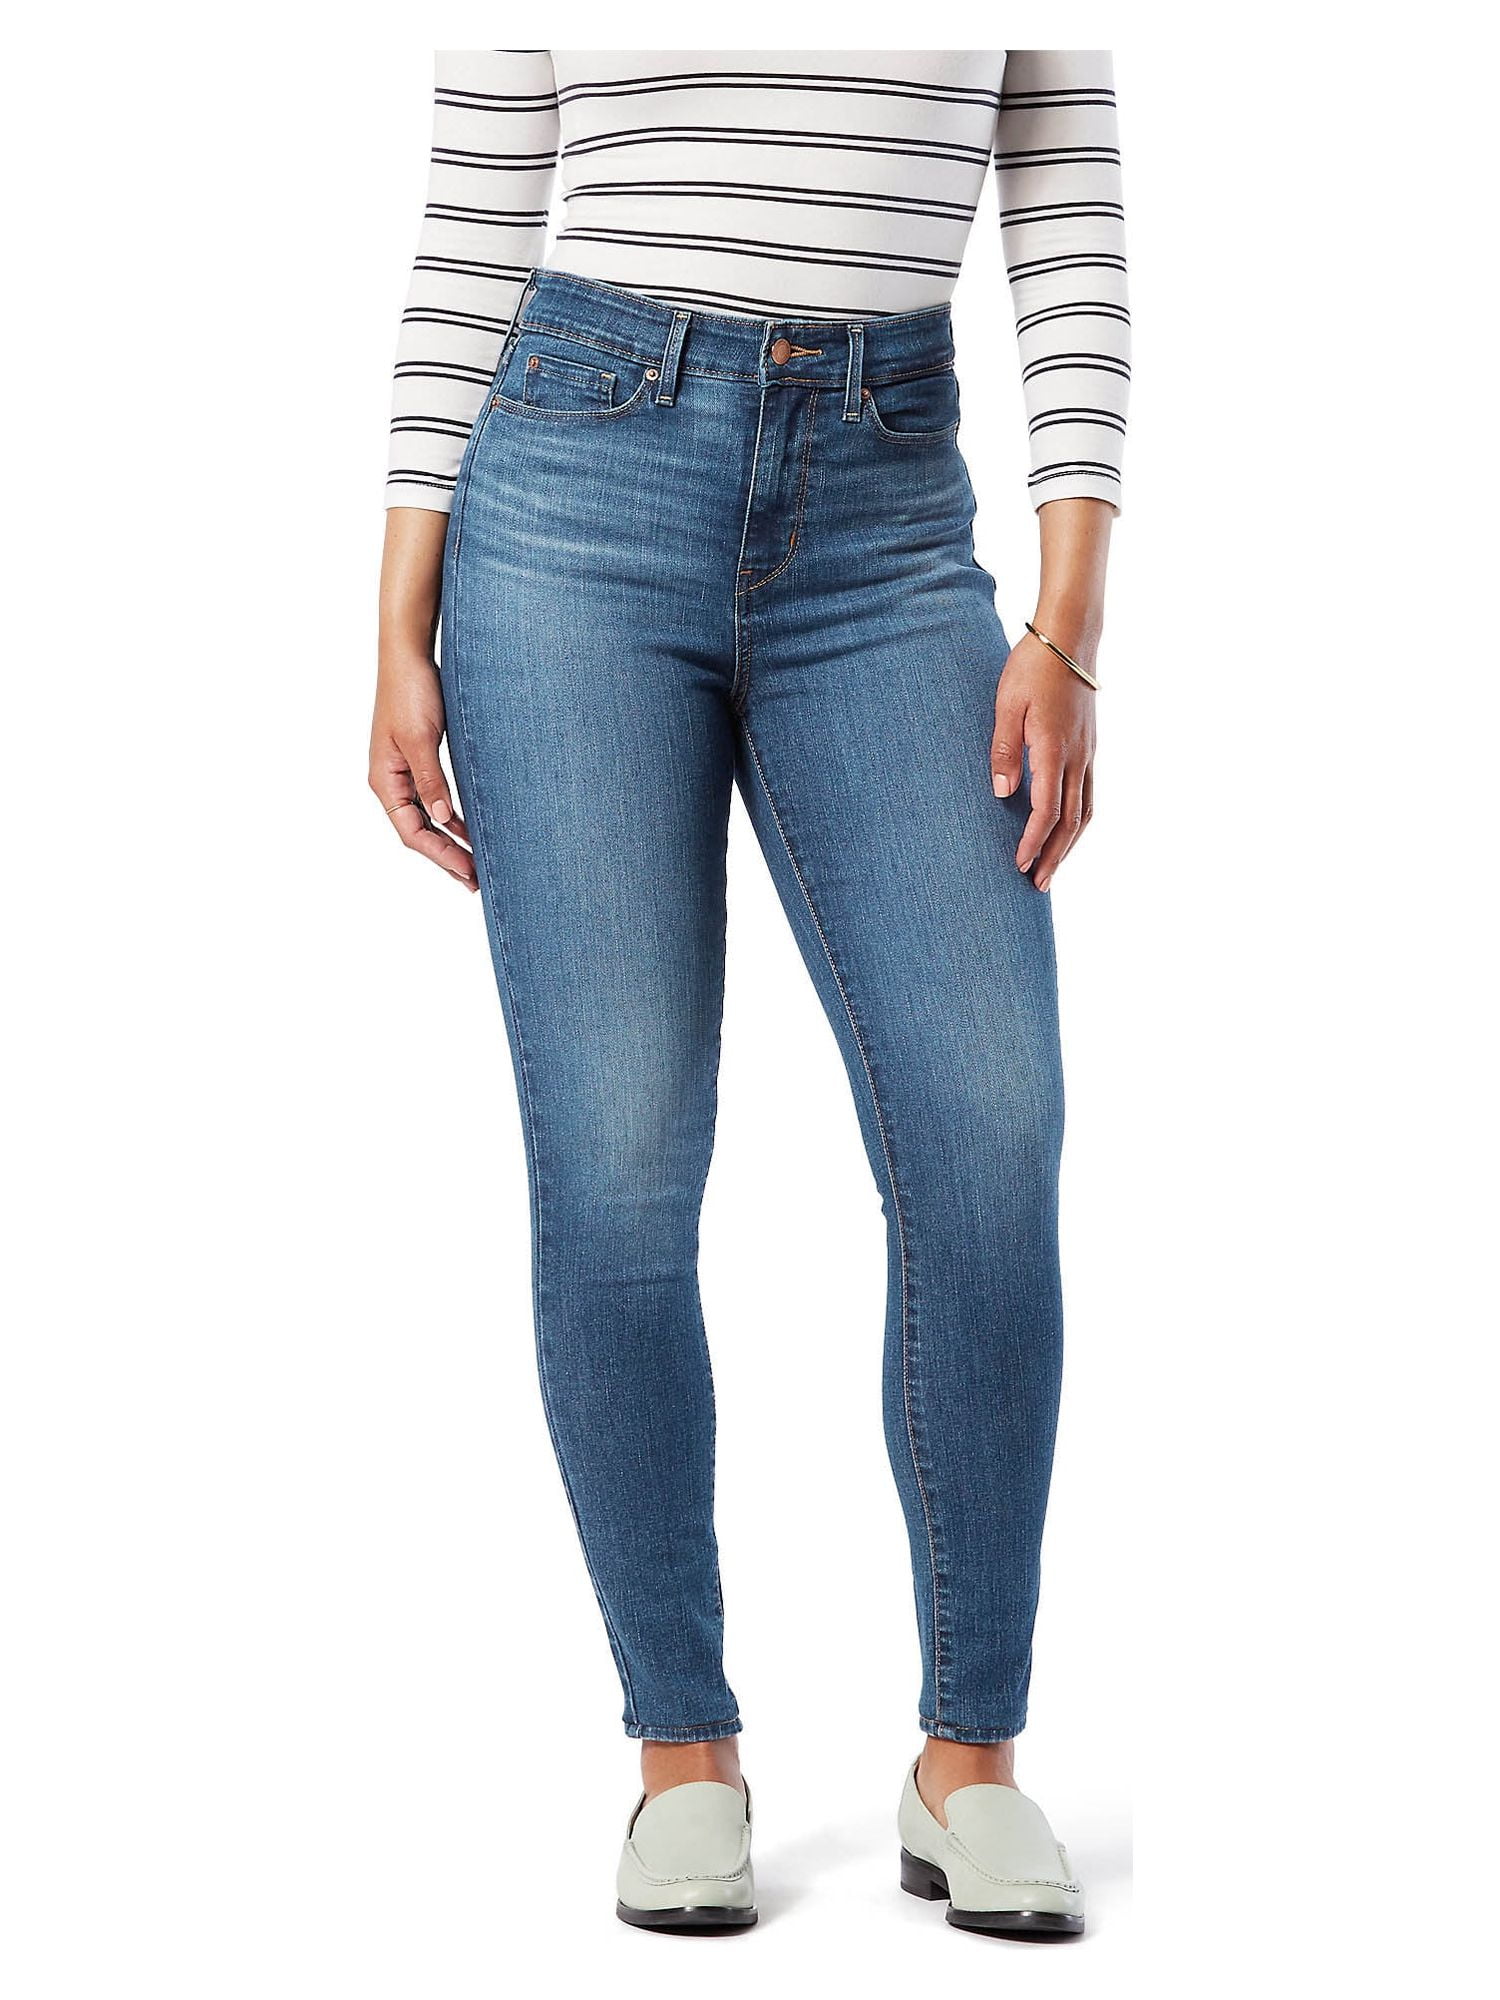 Signature by Levi Strauss & Co. Women's High Rise Skinny Jeans